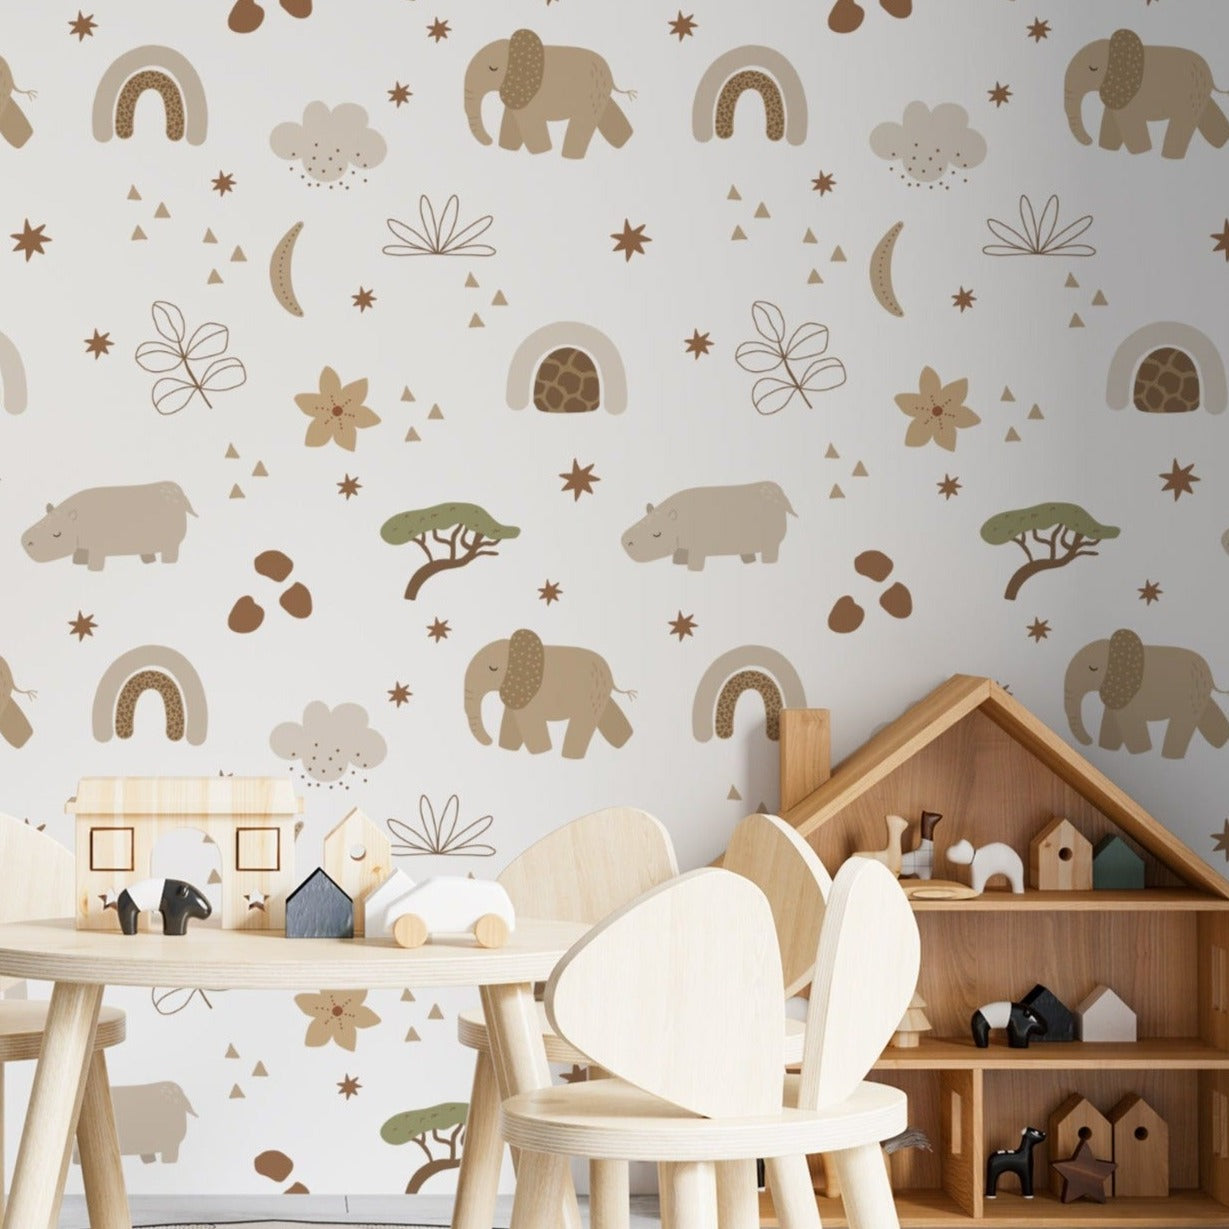 A kids’ playroom showcasing the Safari Animals Kids Wallpaper III with adorable elephants, hippos, and other gentle animals in muted tones on a white backdrop. The space is styled with a wooden children’s table set and animal-shaped shelves, creating an inspiring and educational environment